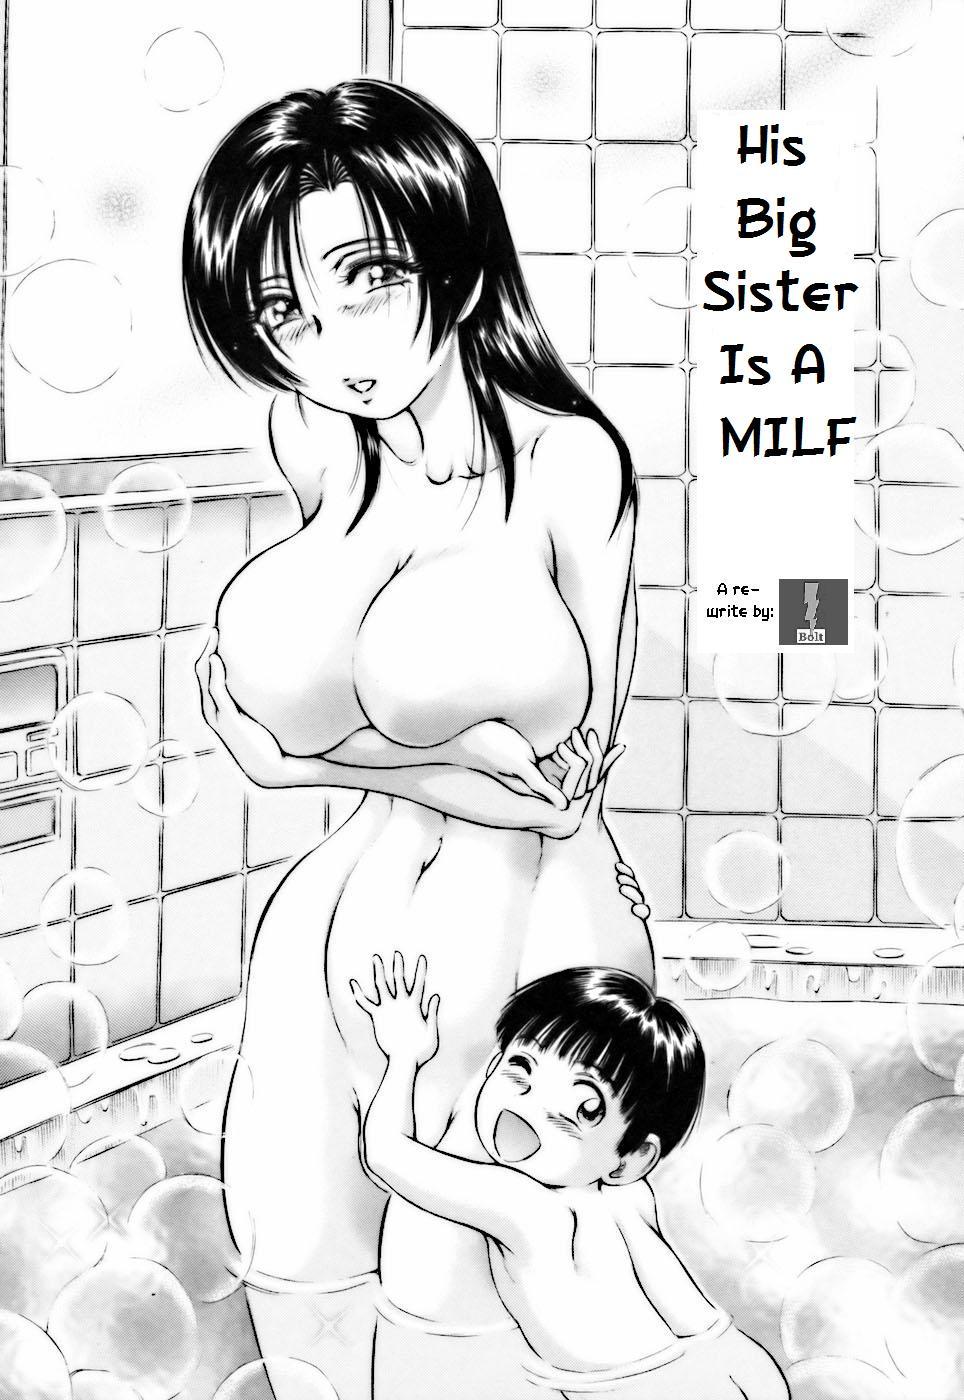 His Big Sister Is A MILF 0